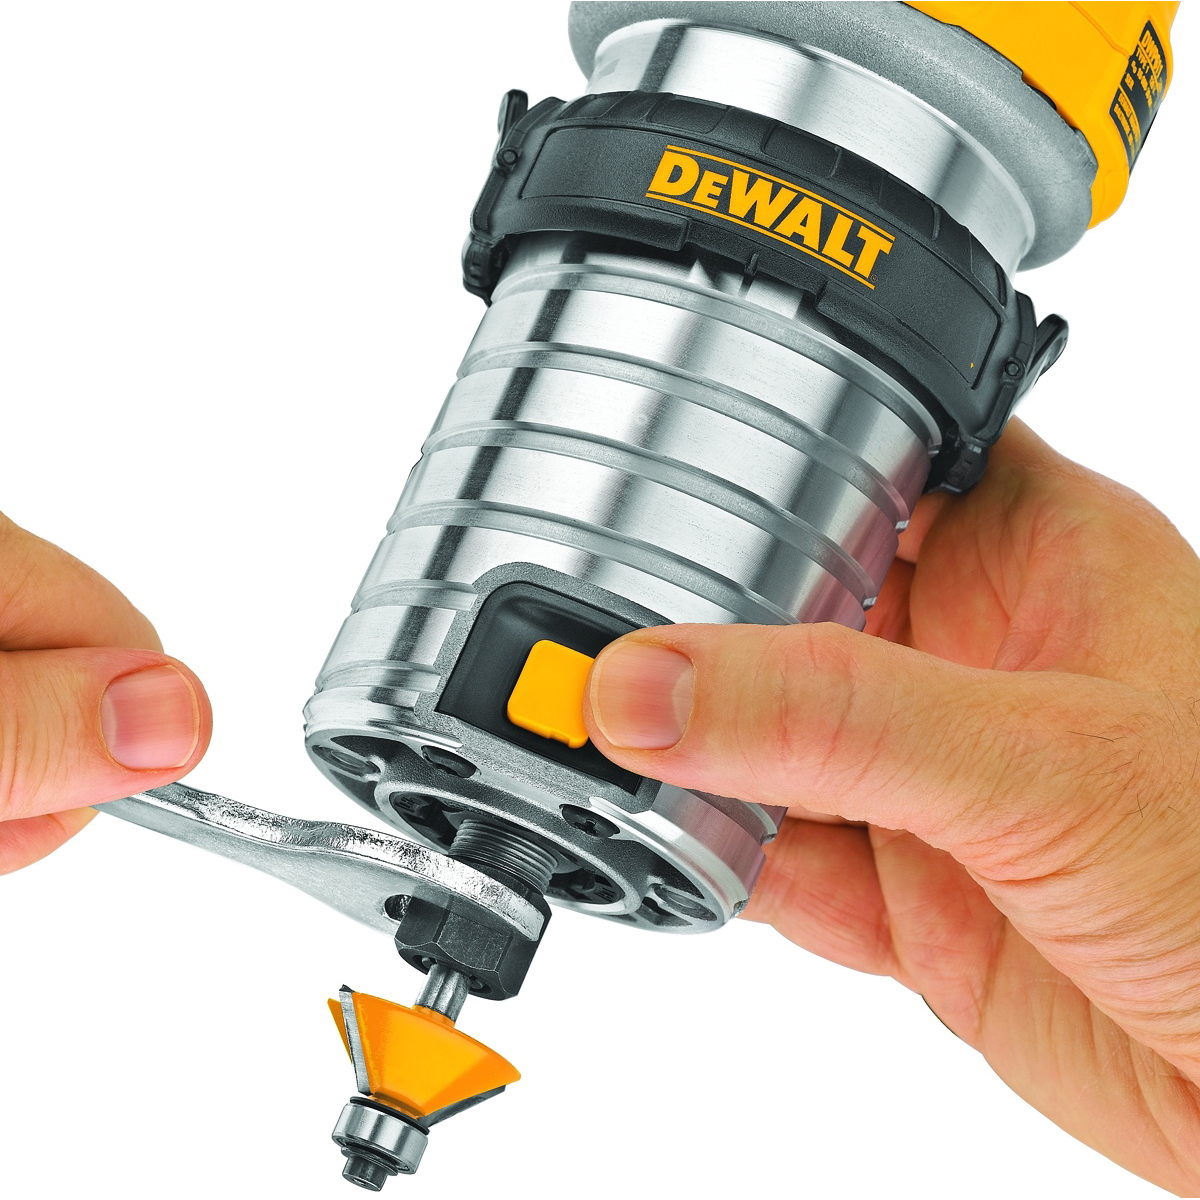 DeWALT DWP611 Compact Router with LED, 7 A, 16,000 to 27,000 rpm Load Speed, 1-1/2 in Max Stroke - 2